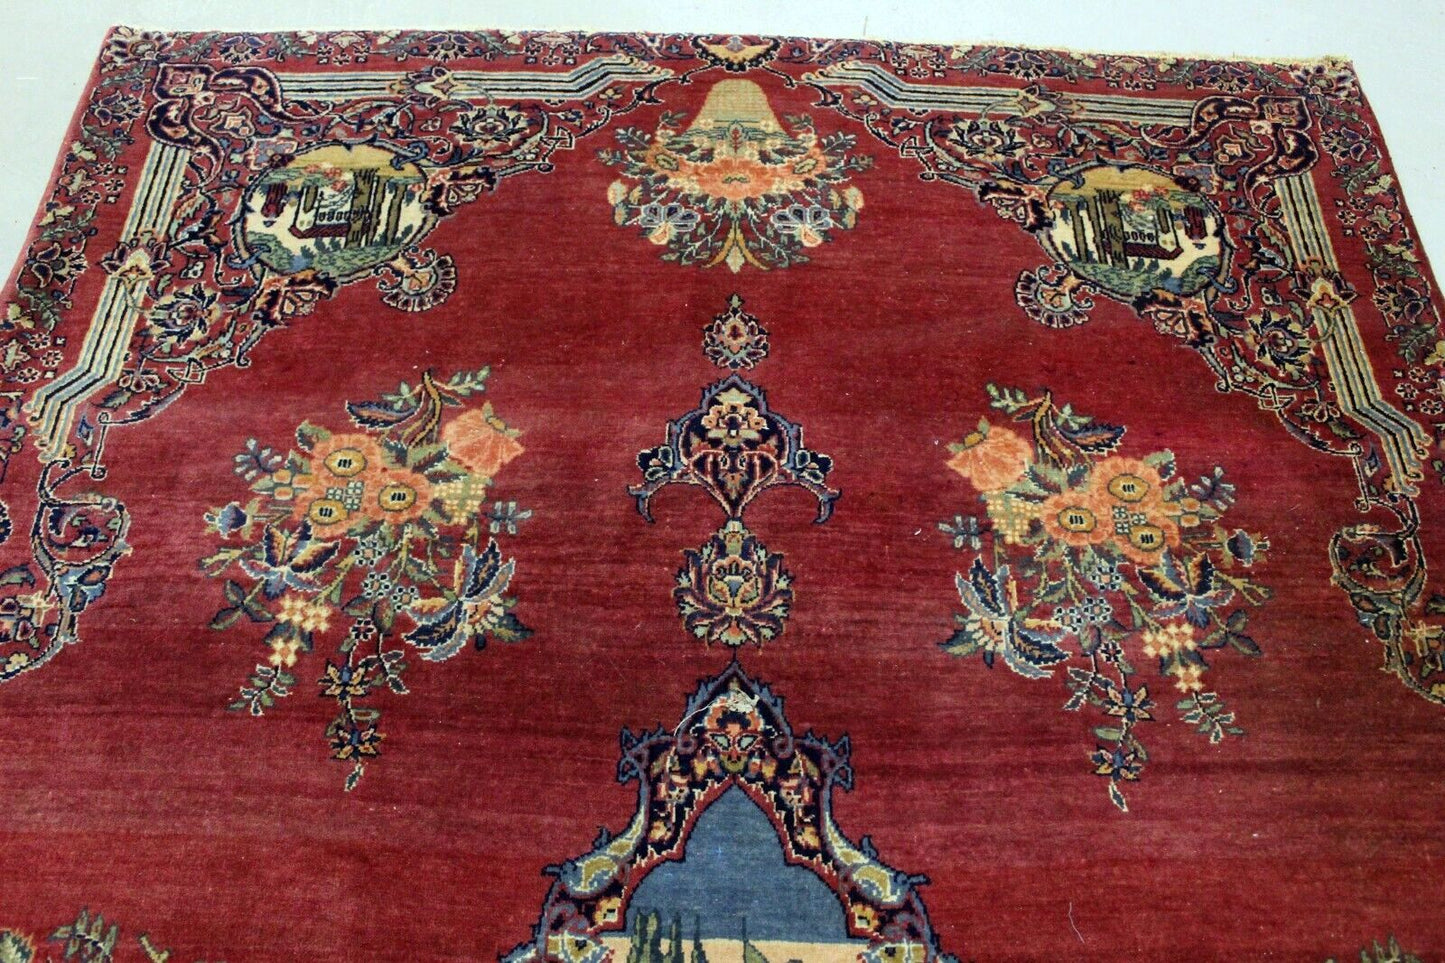 Captivating Pictorial Scene with Storks, Deer, Goats, and Ducks on Antique Kerman Rug - 1920s